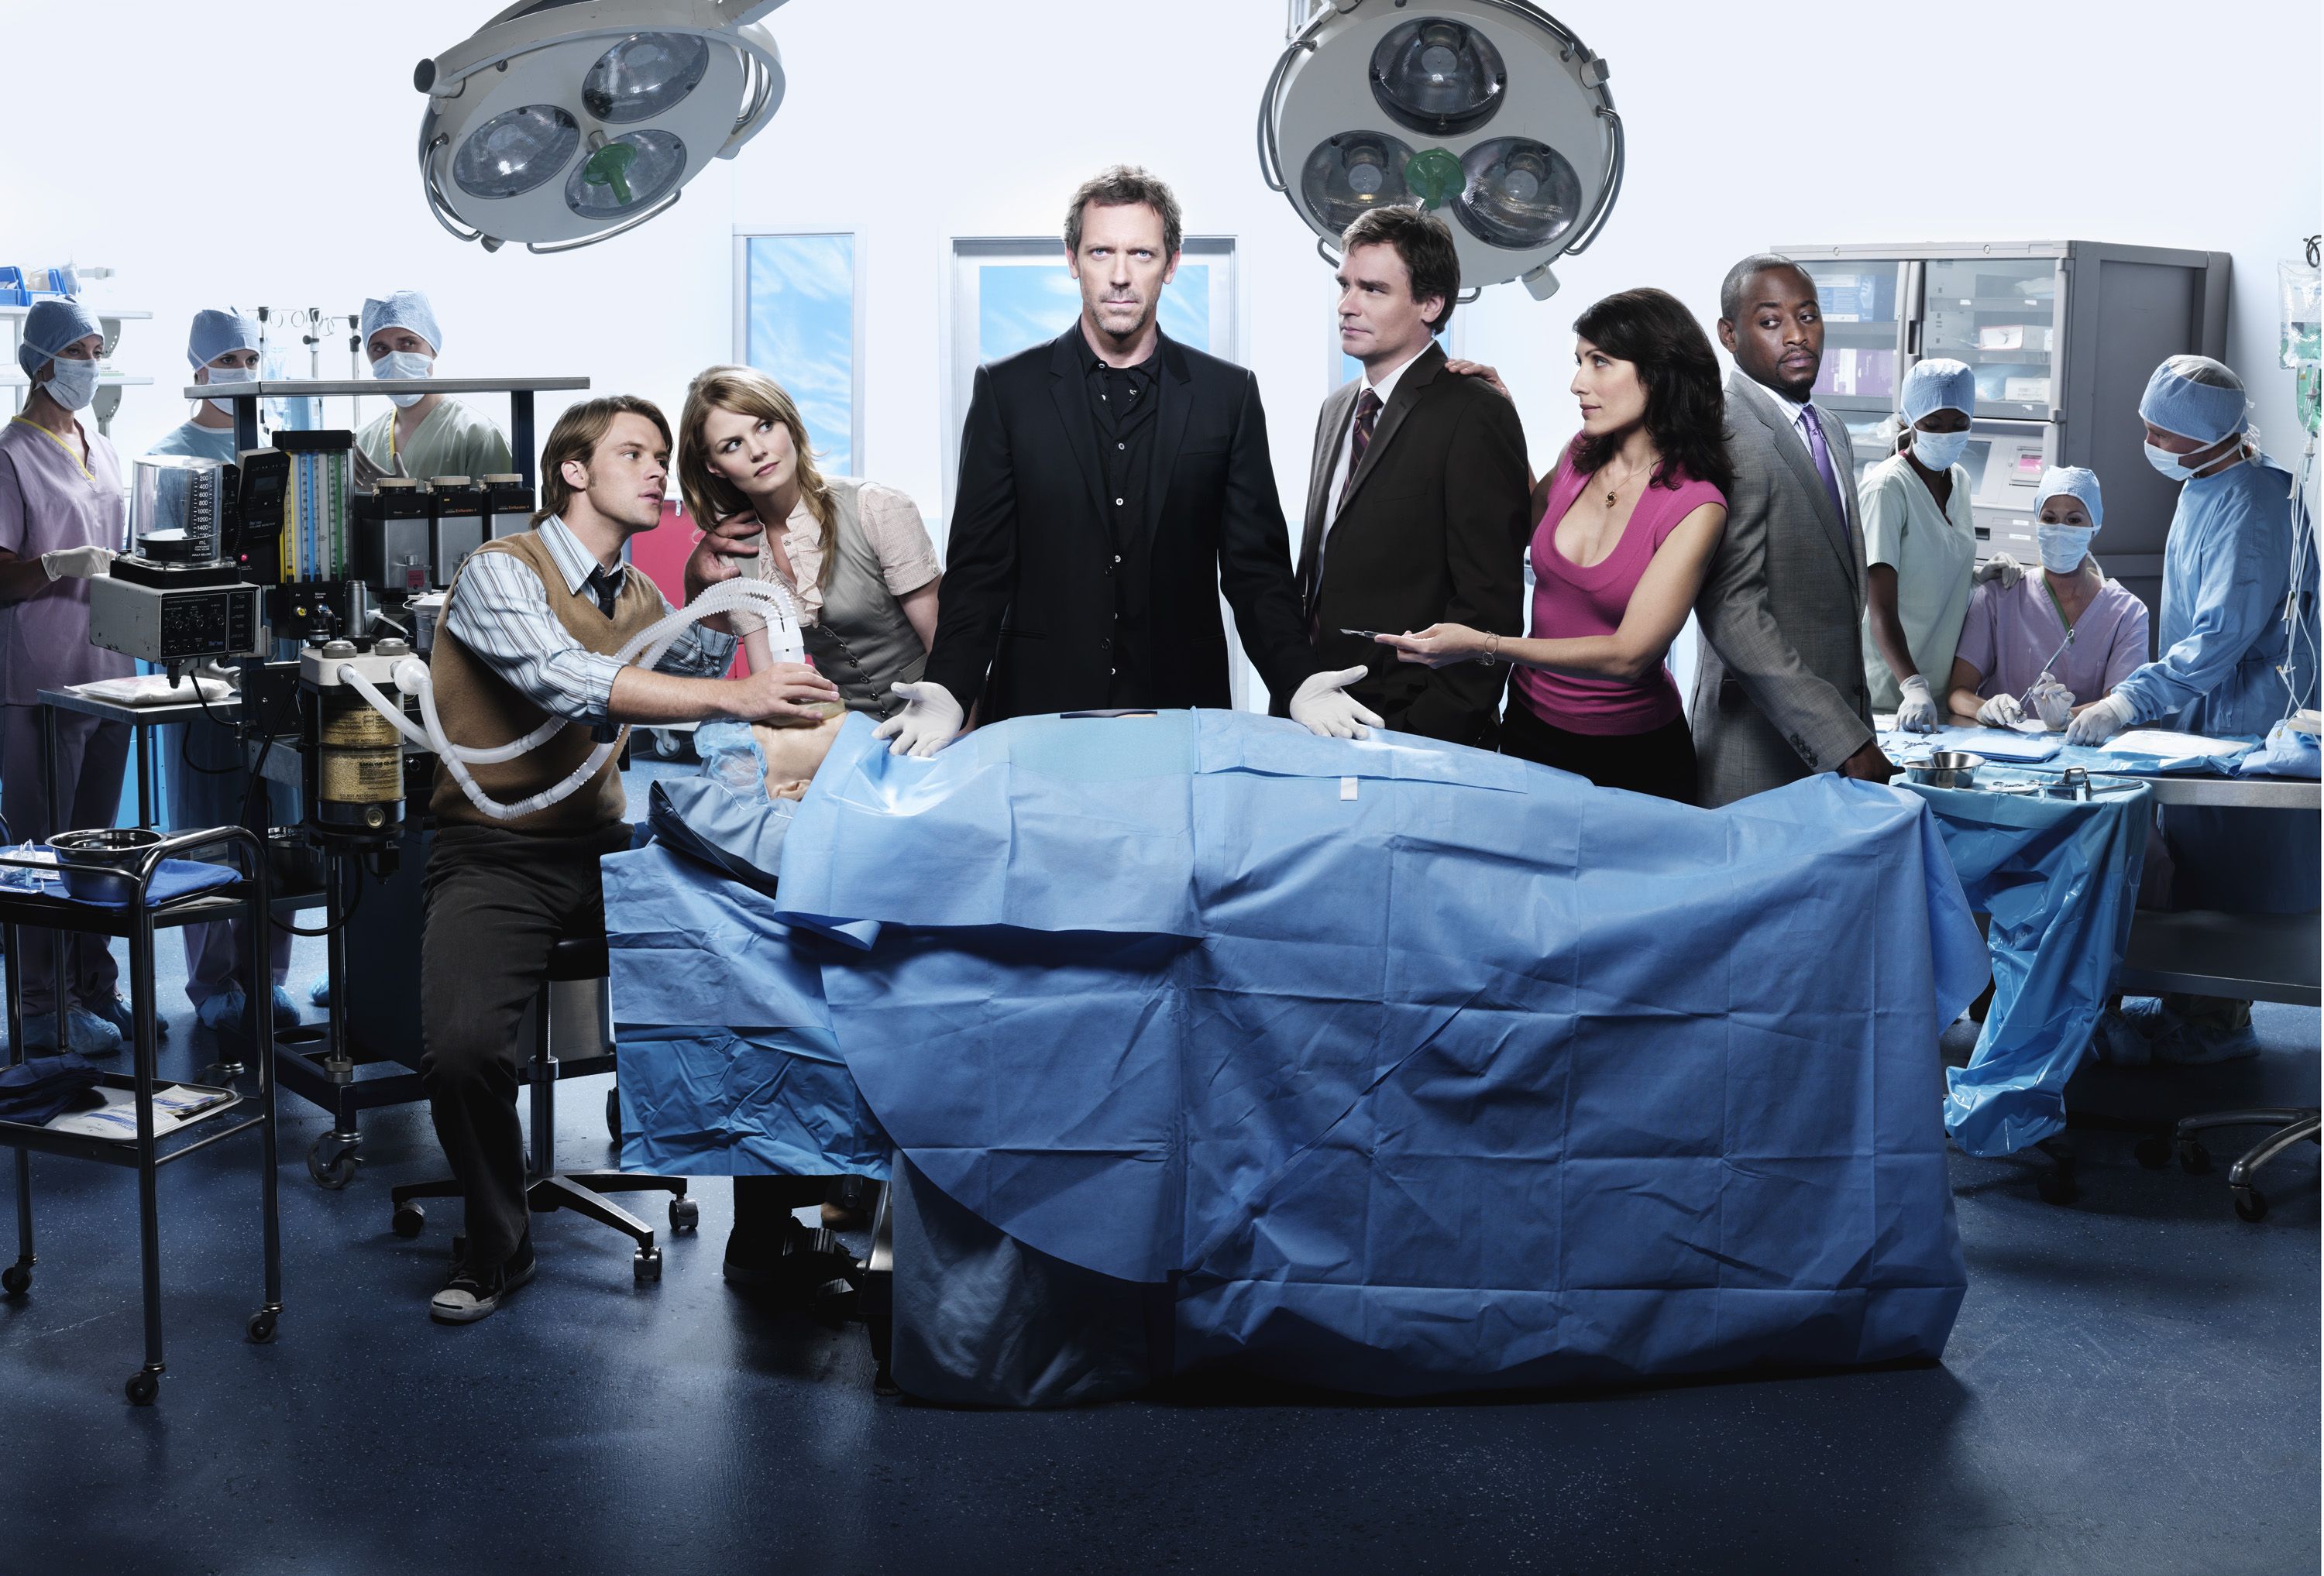 25 Things You Didn't Know About House - House TV Show Hugh Laurie